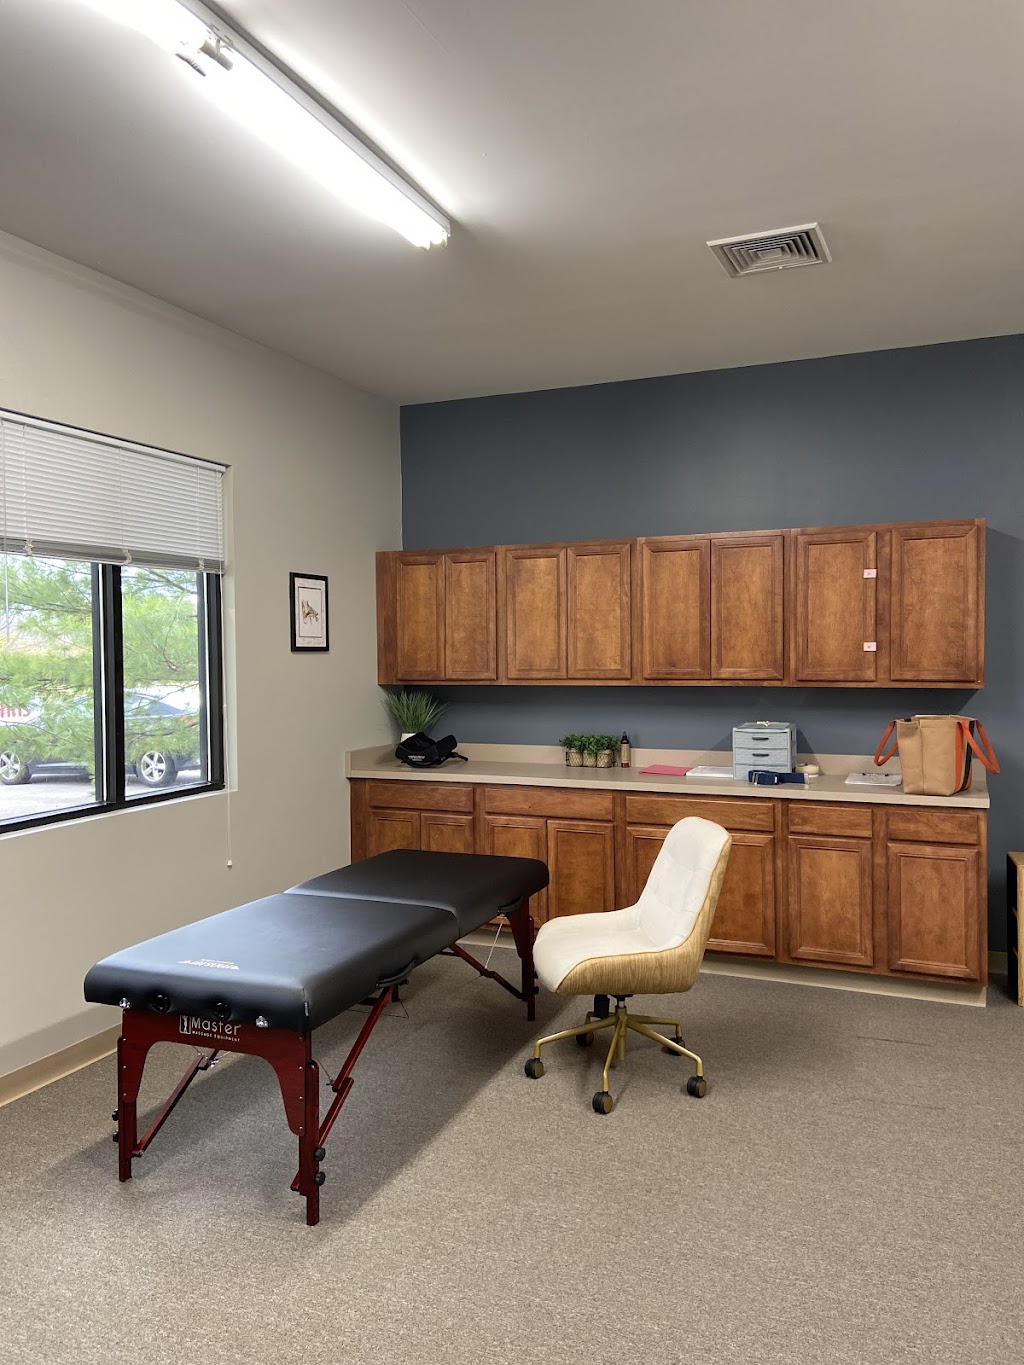 Labyrinth Physical Therapy & Wellness | 10560 Success Ln suite g, Dayton, OH 45458 | Phone: (937) 701-6035